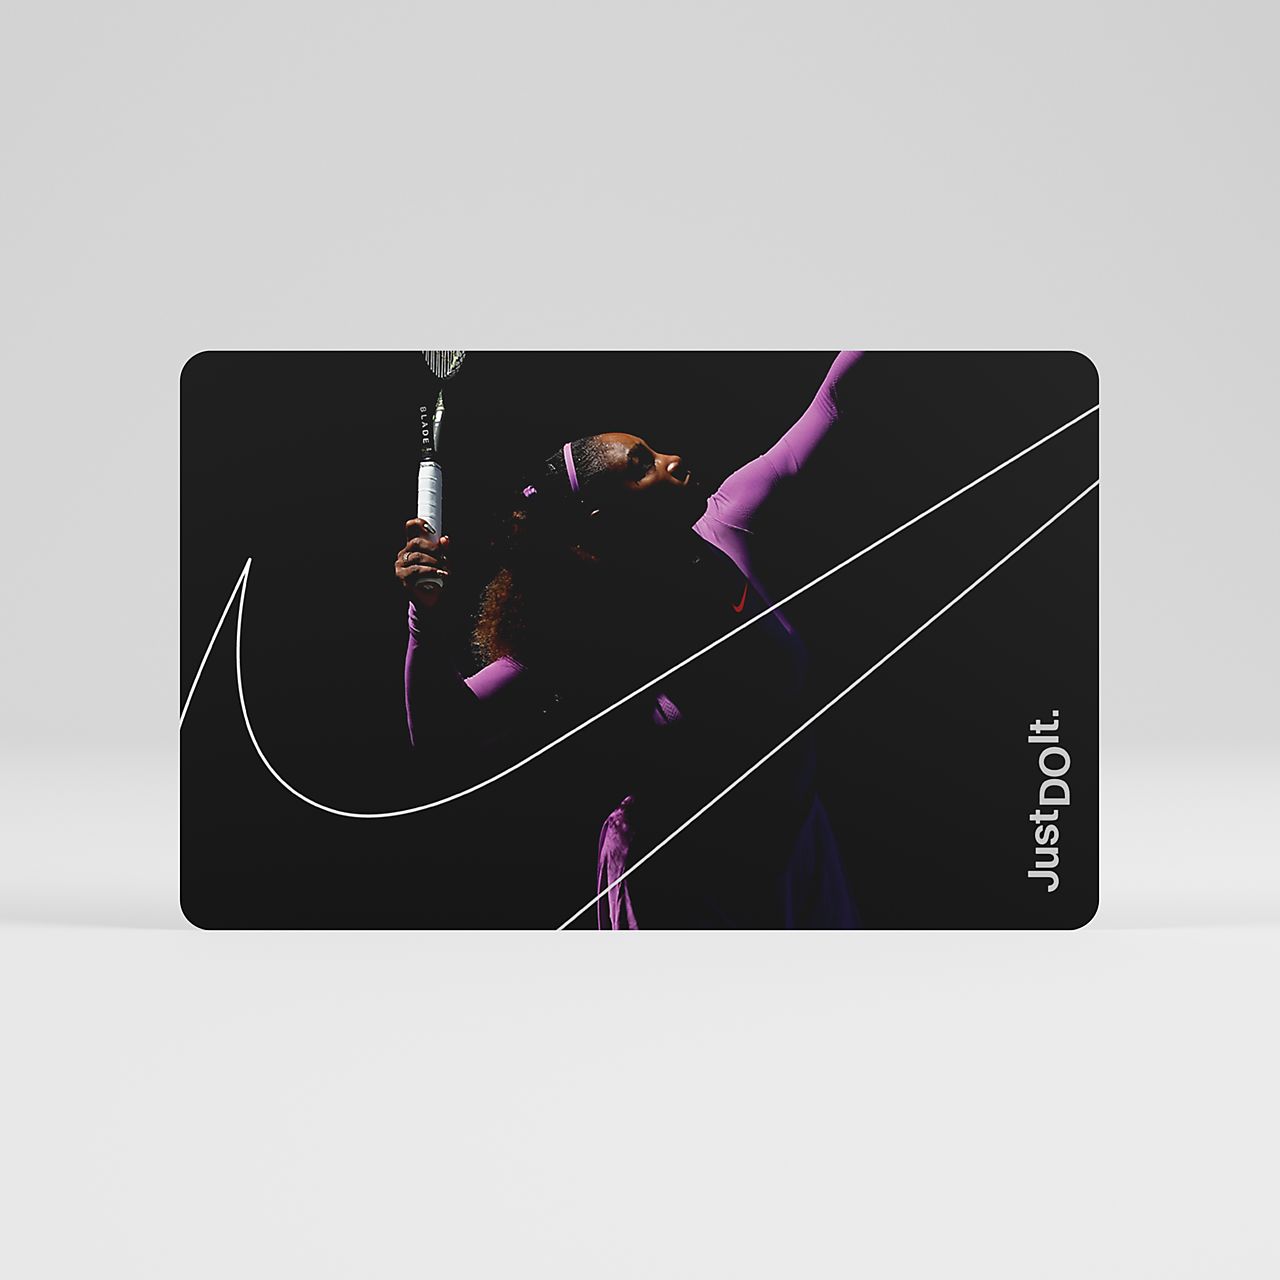 Nike Digital Gift Card Emailed in 24 Hours or Less.